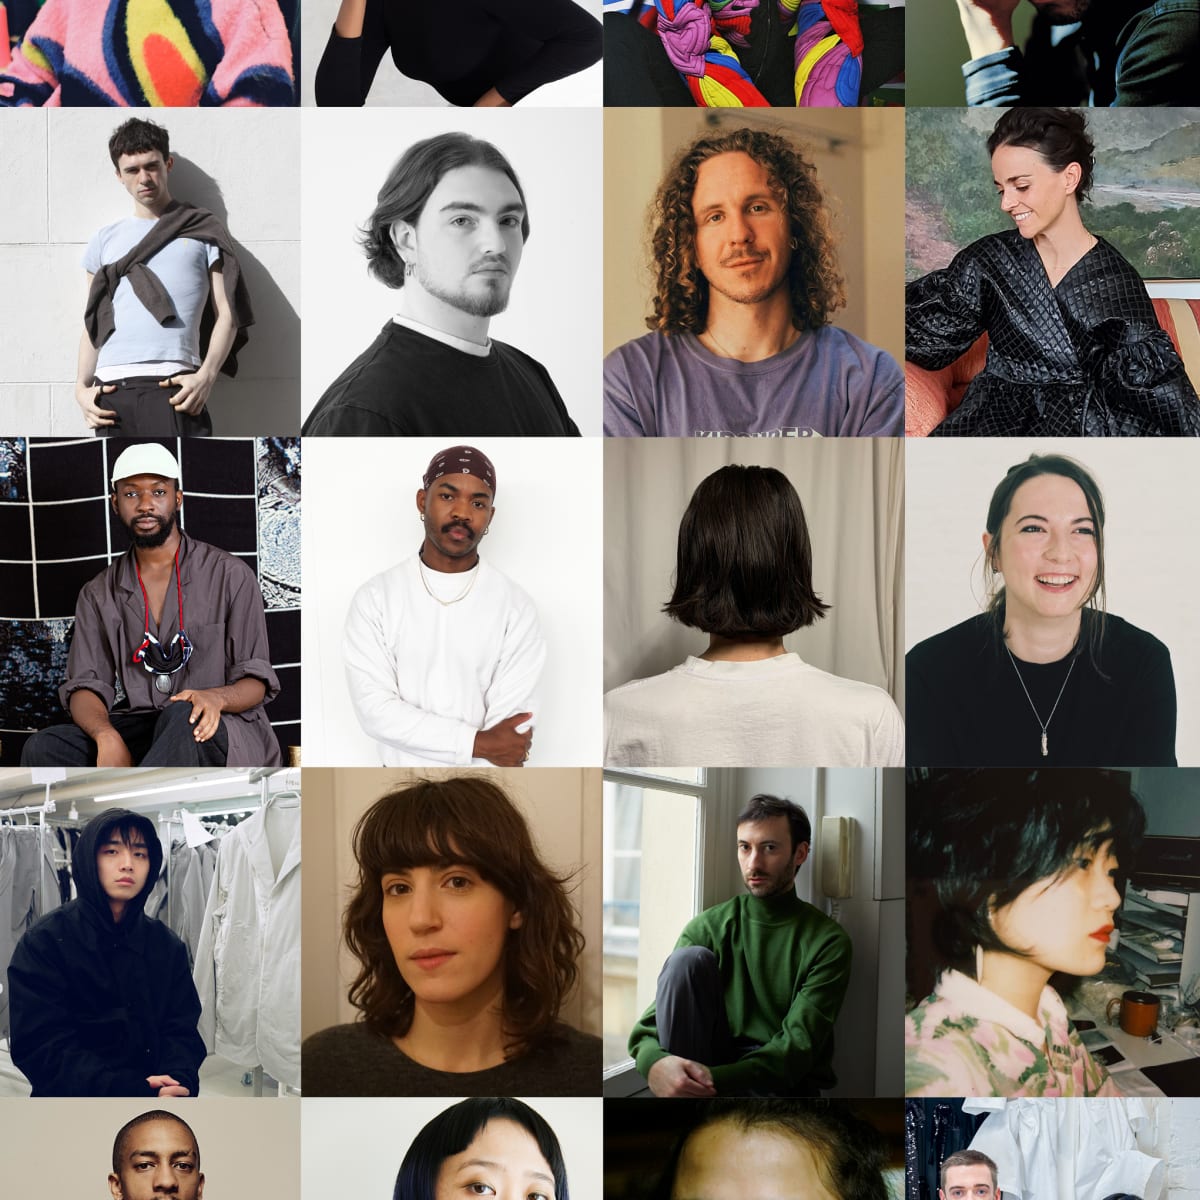 The LVMH Prize Announces Its 2022 Semifinalists